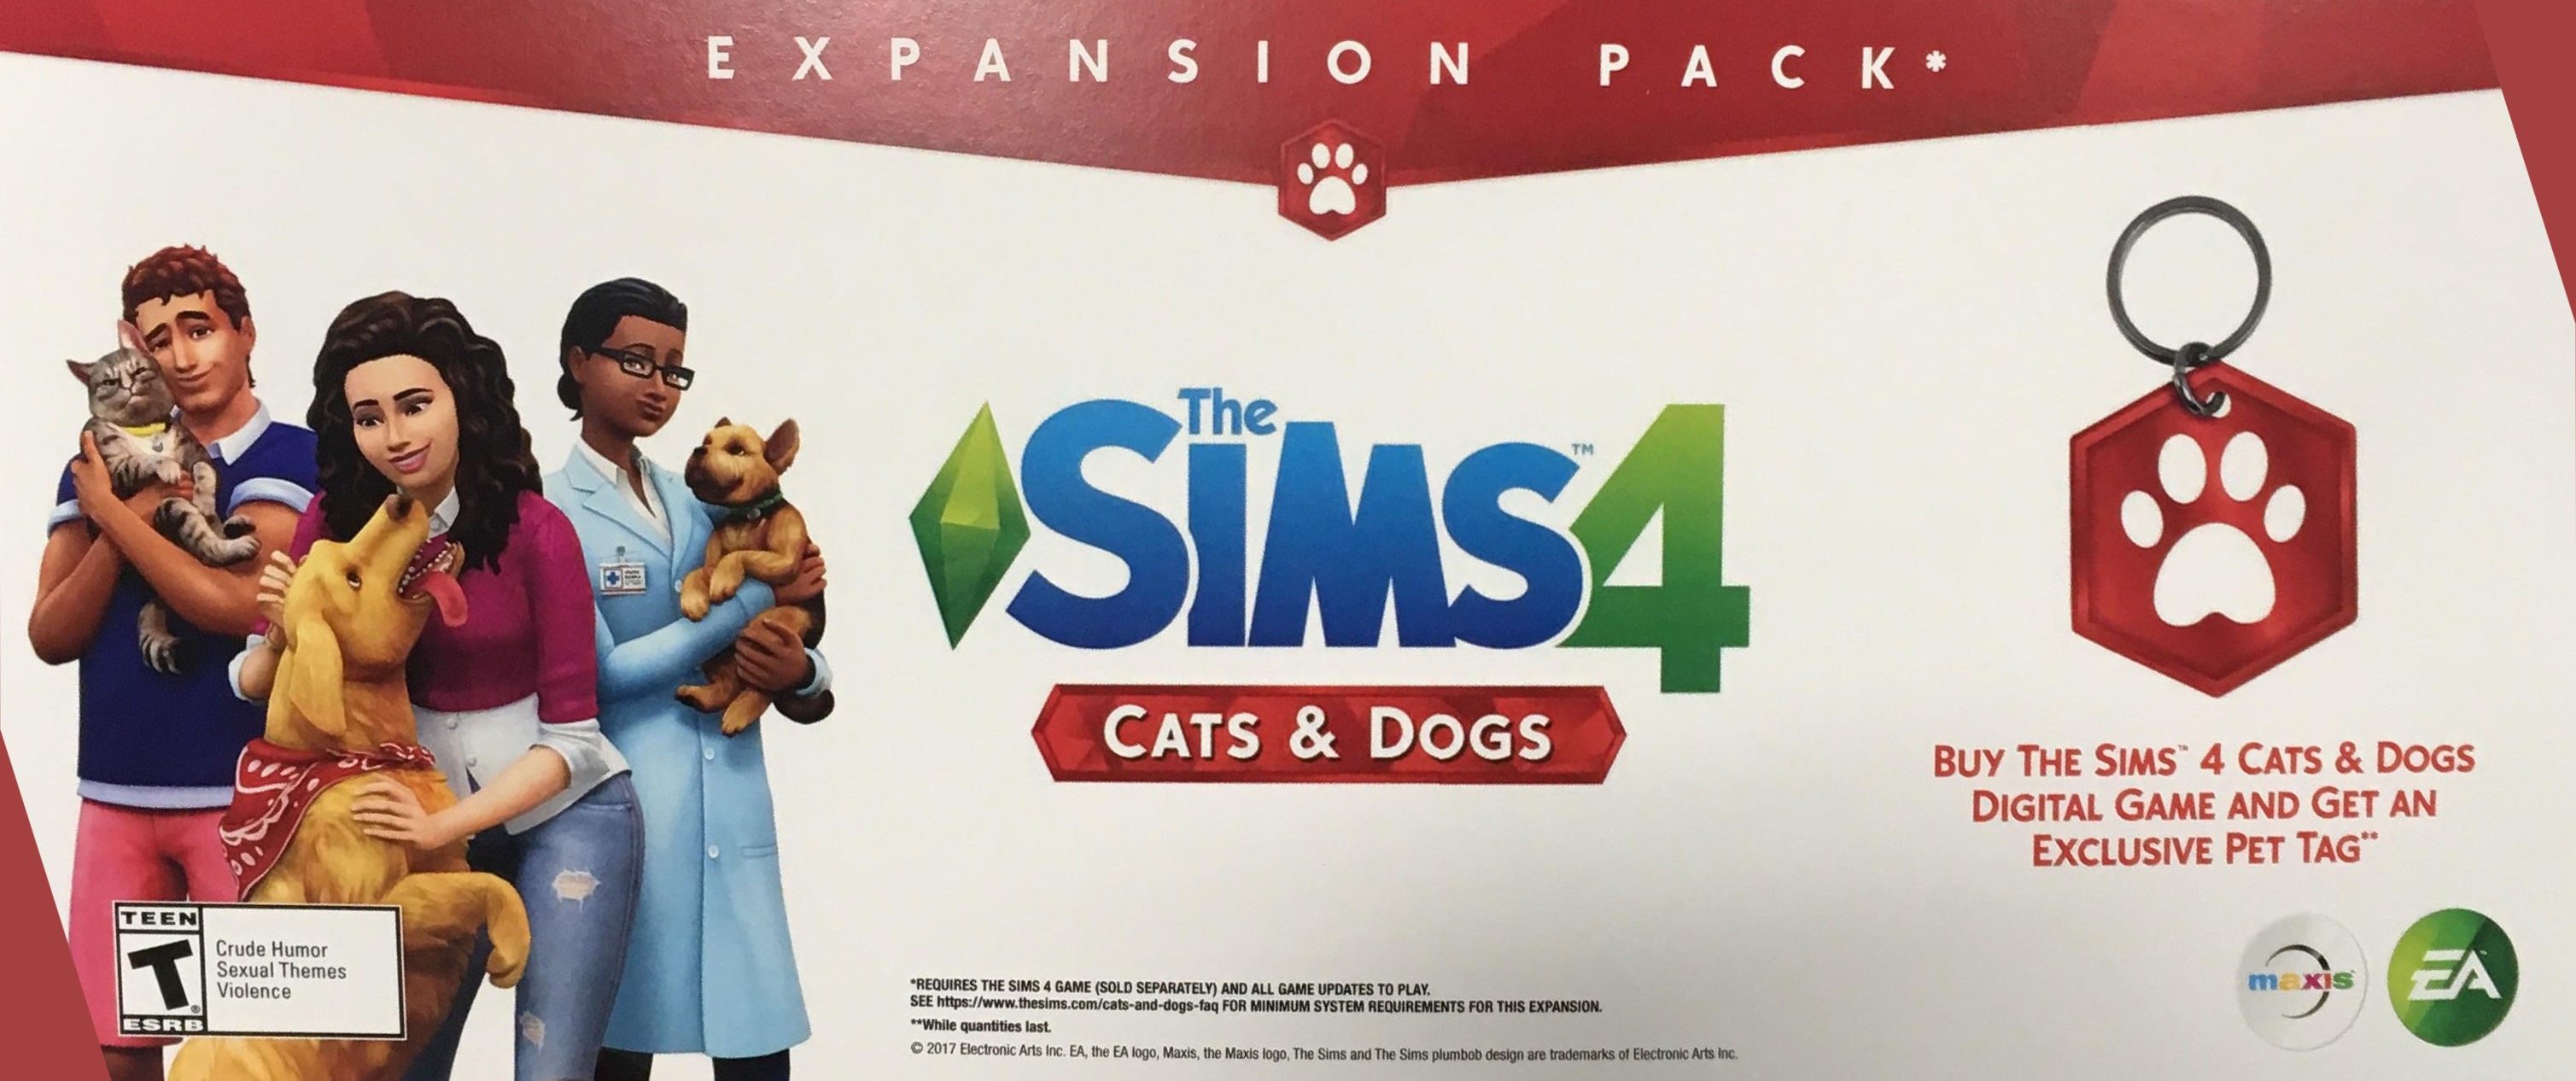 origin codes for sims 4 expansion packs